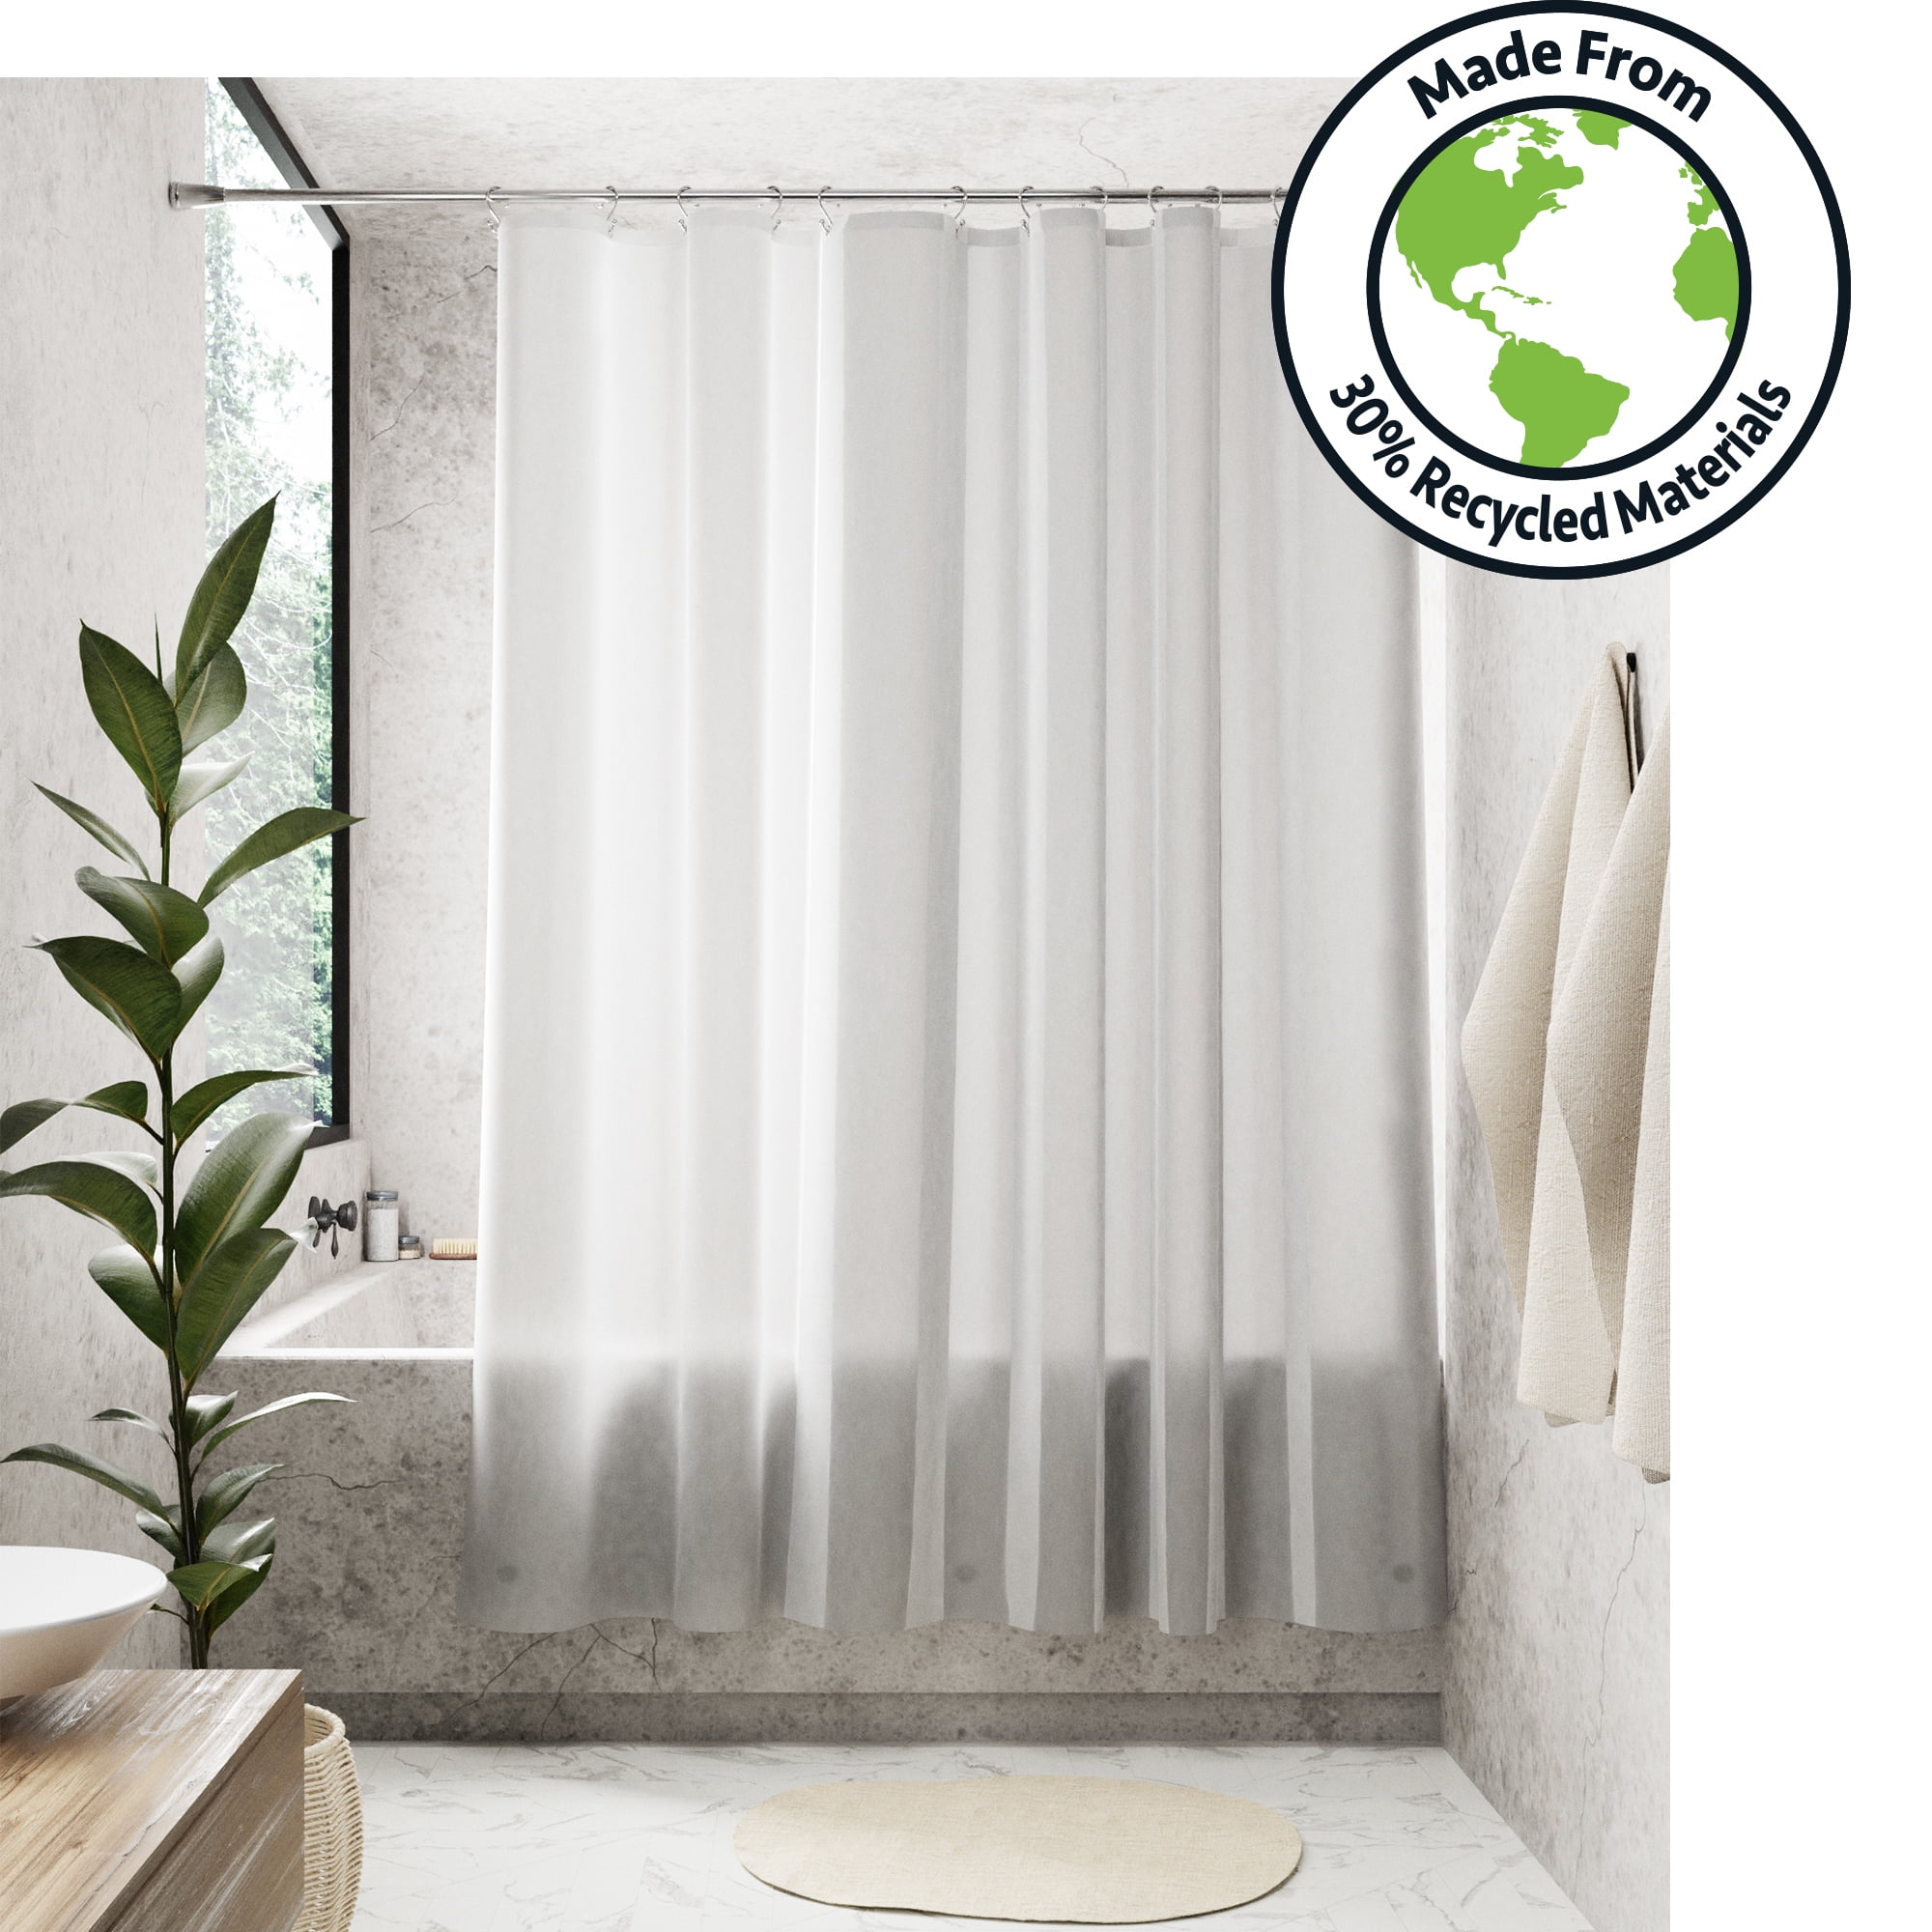 Shower Curtain with Tree Design 100% Waterproof & Eco-Friendly 